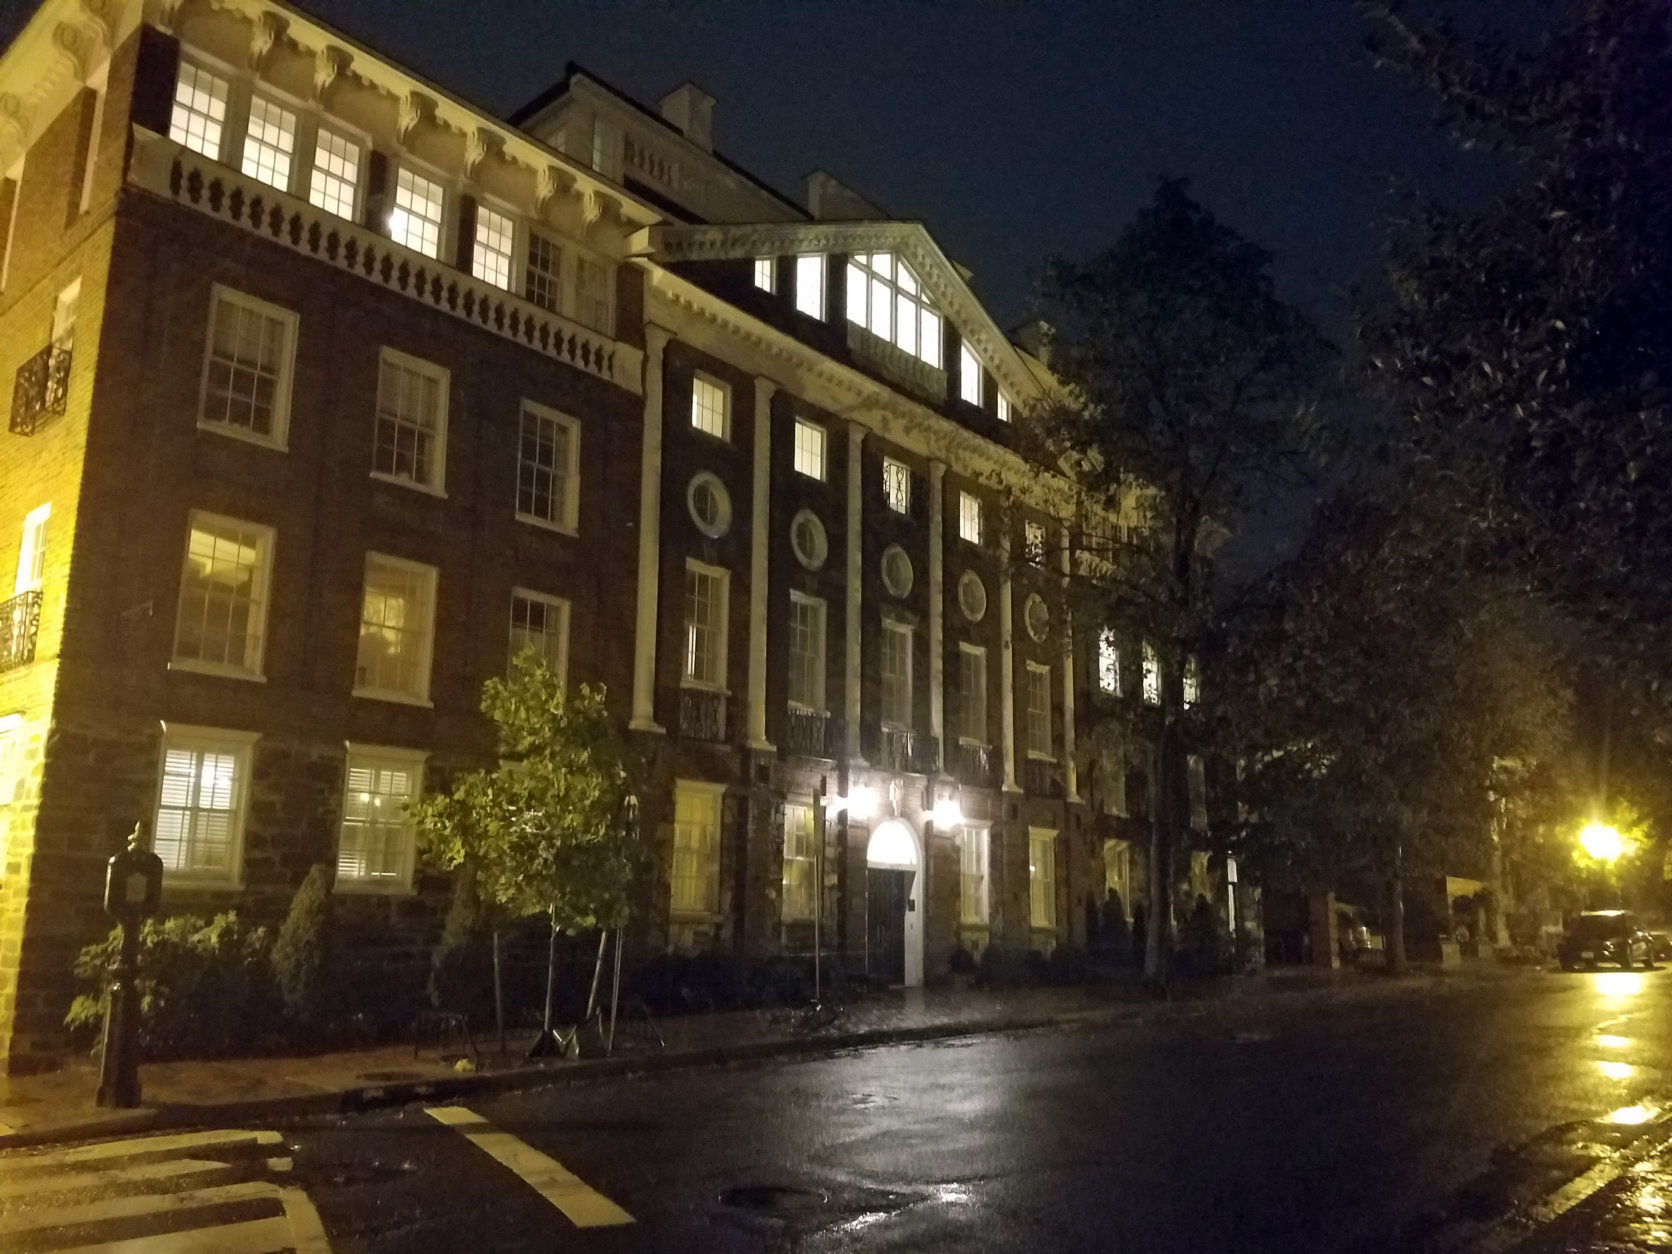 Halcyon House, 3400 Prospect Street in Georgetown, is said to be haunted.